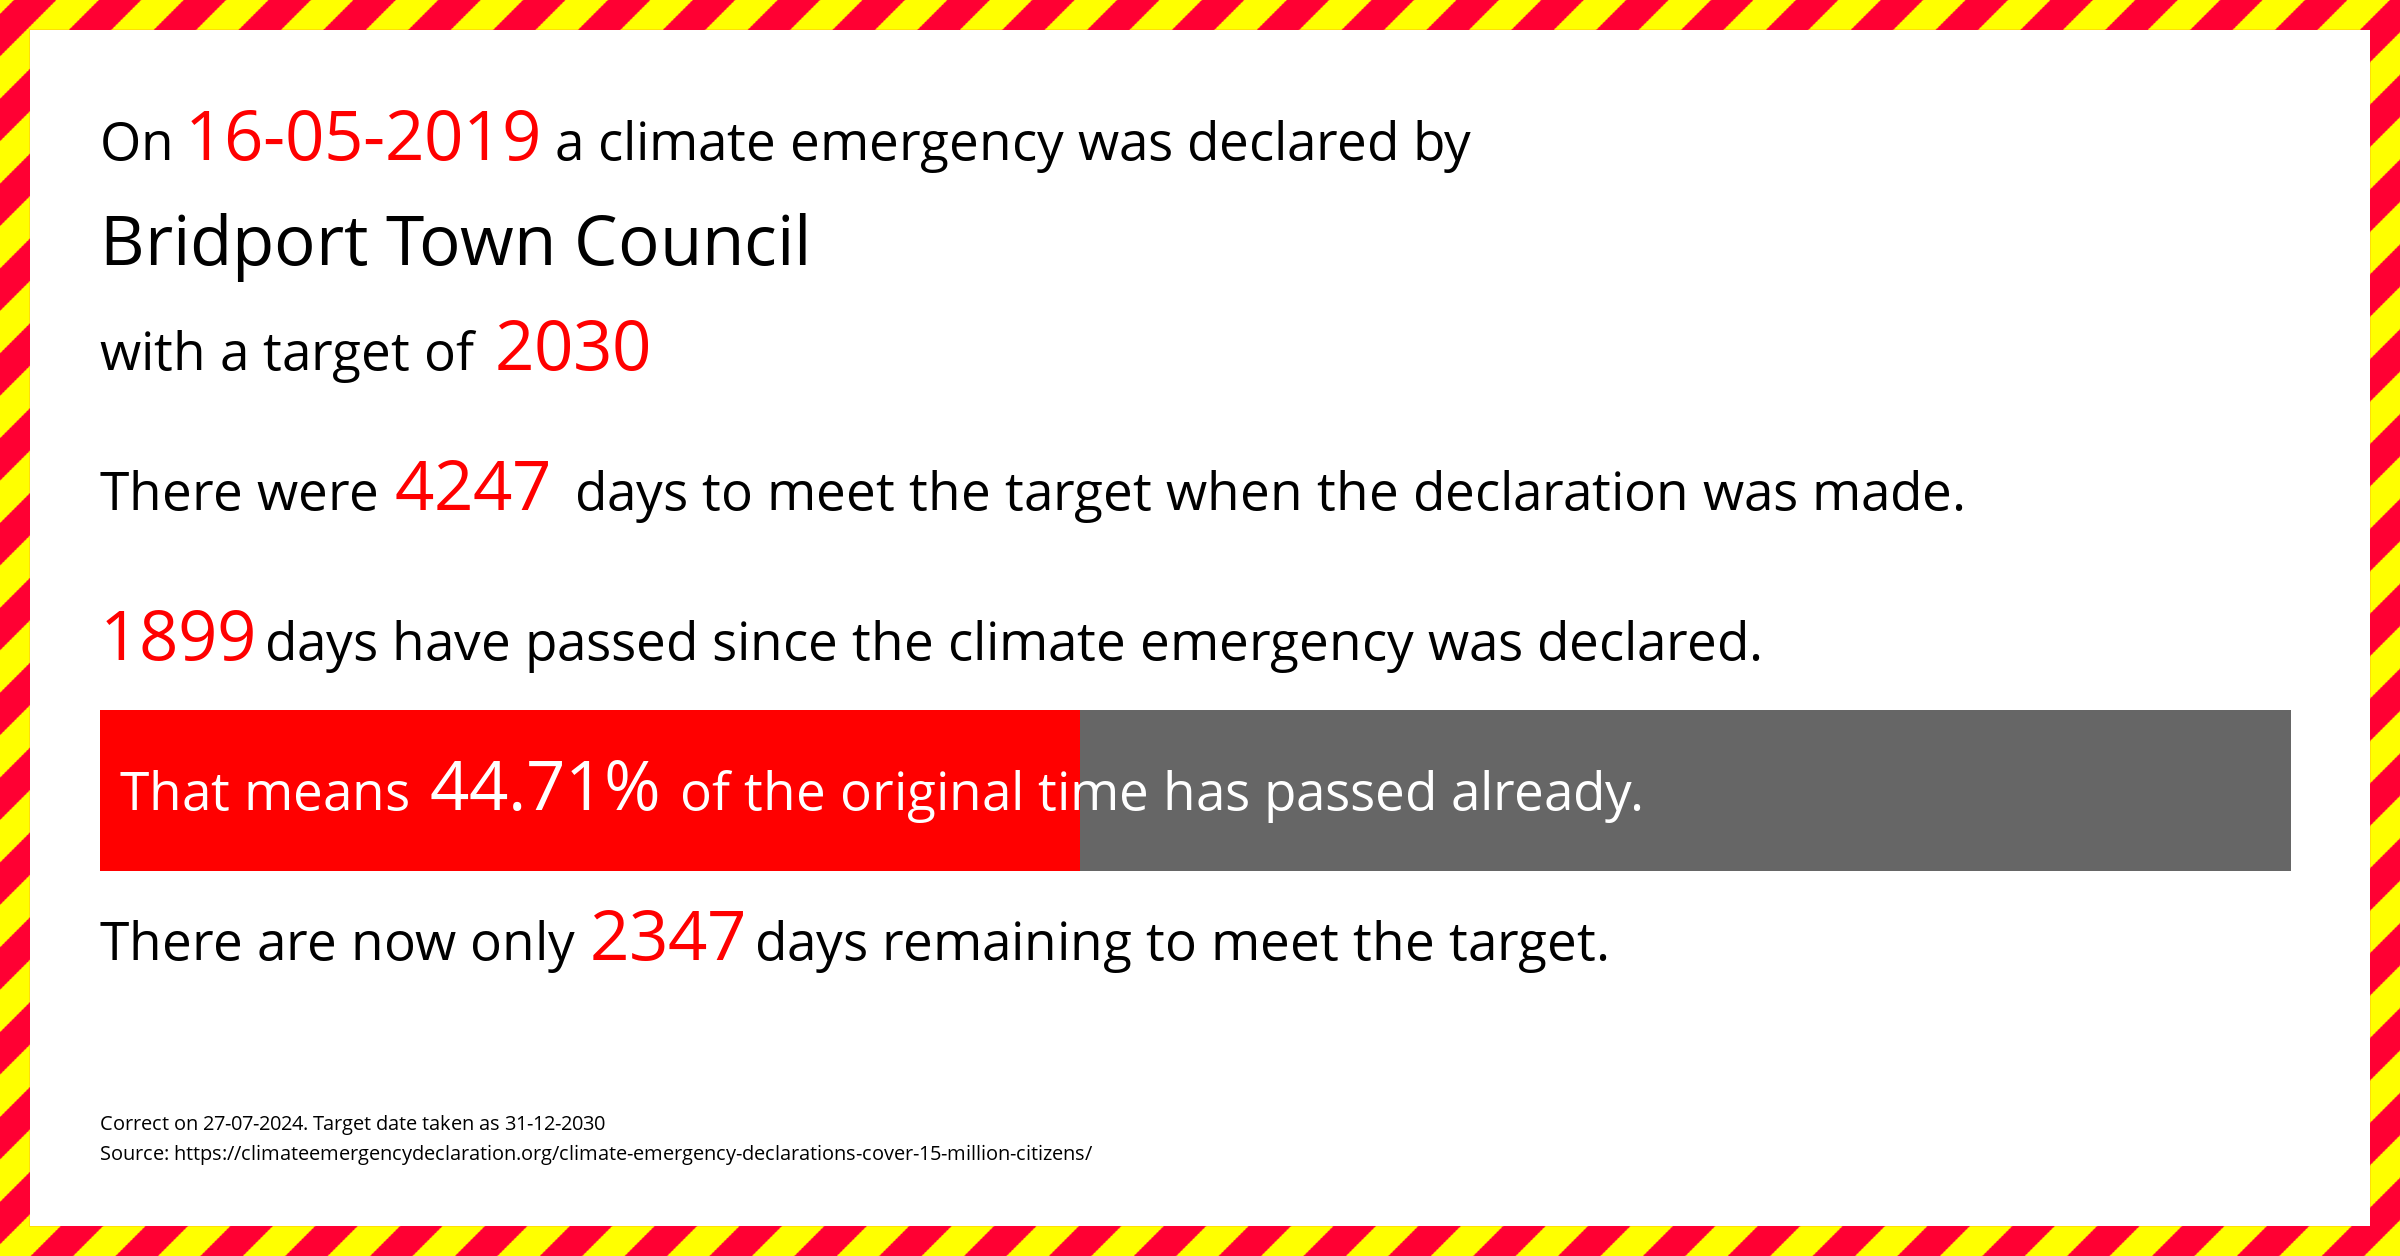 Bridport Town Council declared a Climate emergency on Thursday 16th May 2019, with a target of 2030.